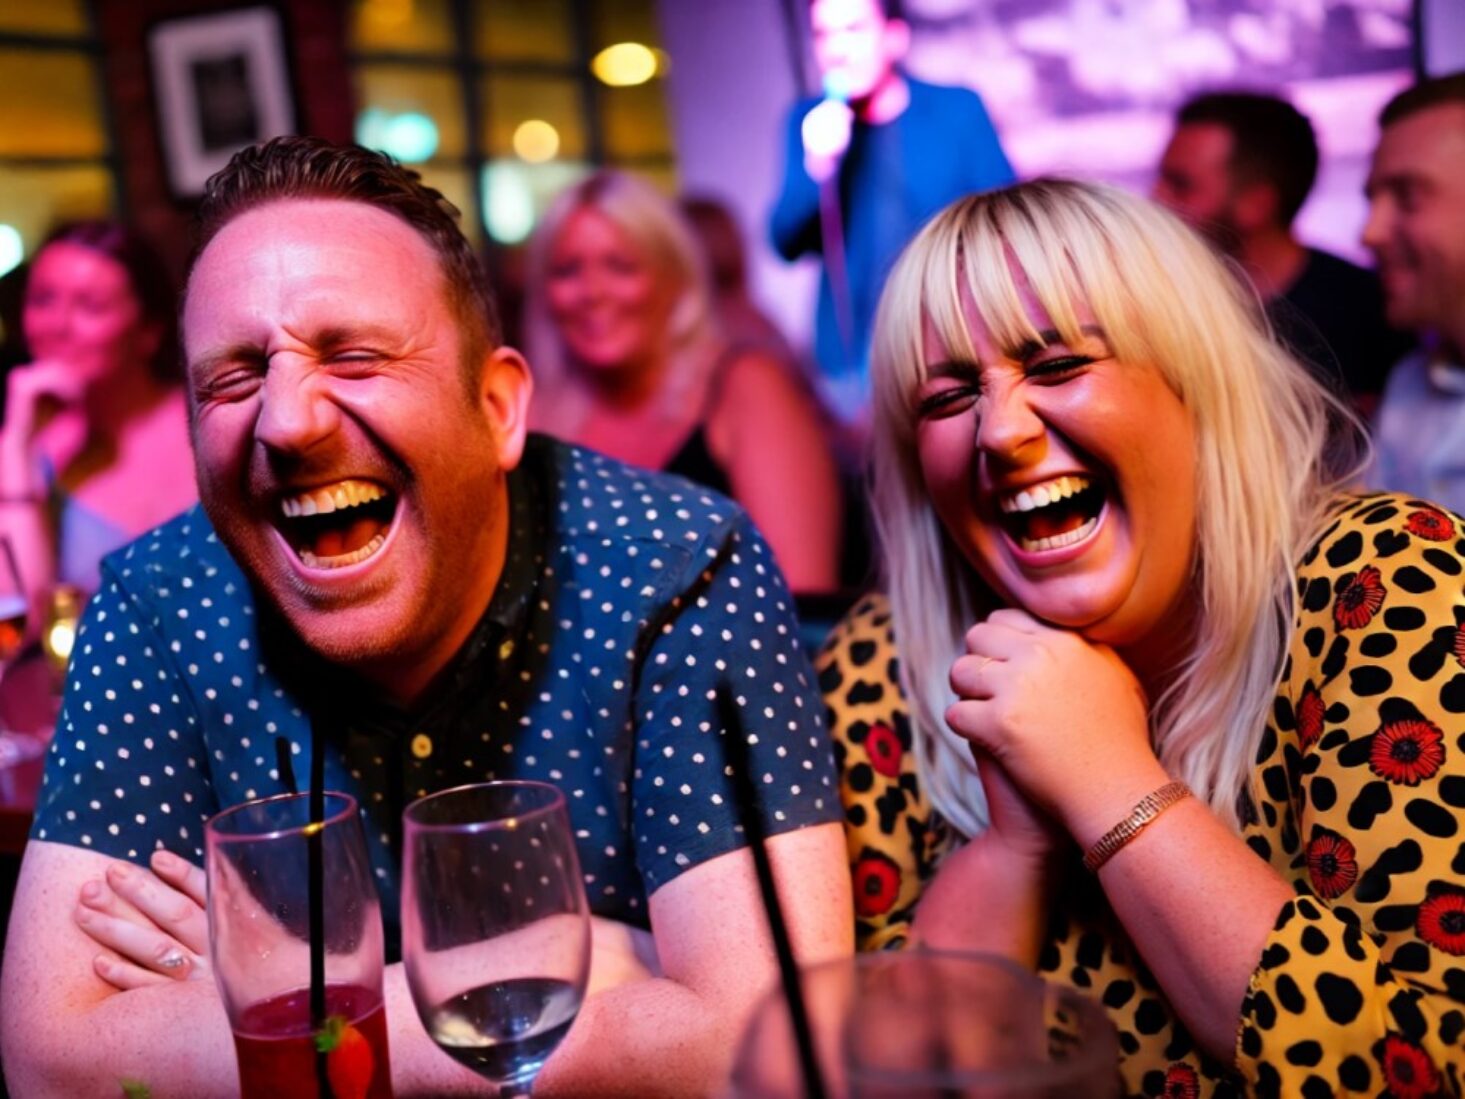 Manchester Venues for Live Comedy